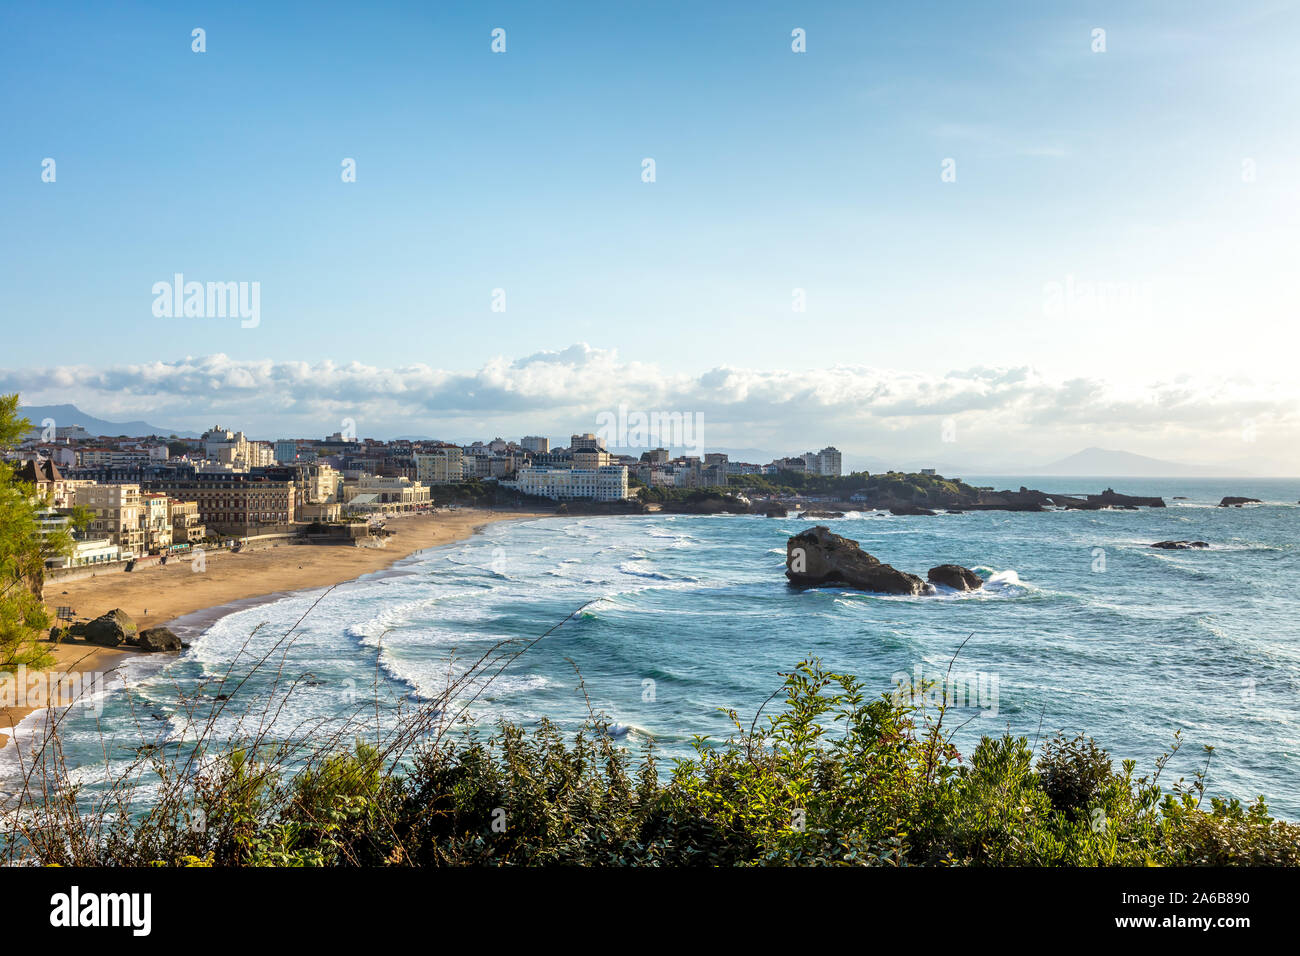 Biarritz, France - 06 September 2019 - View of the beach and the city of Biarritz, french riviera, France Stock Photo